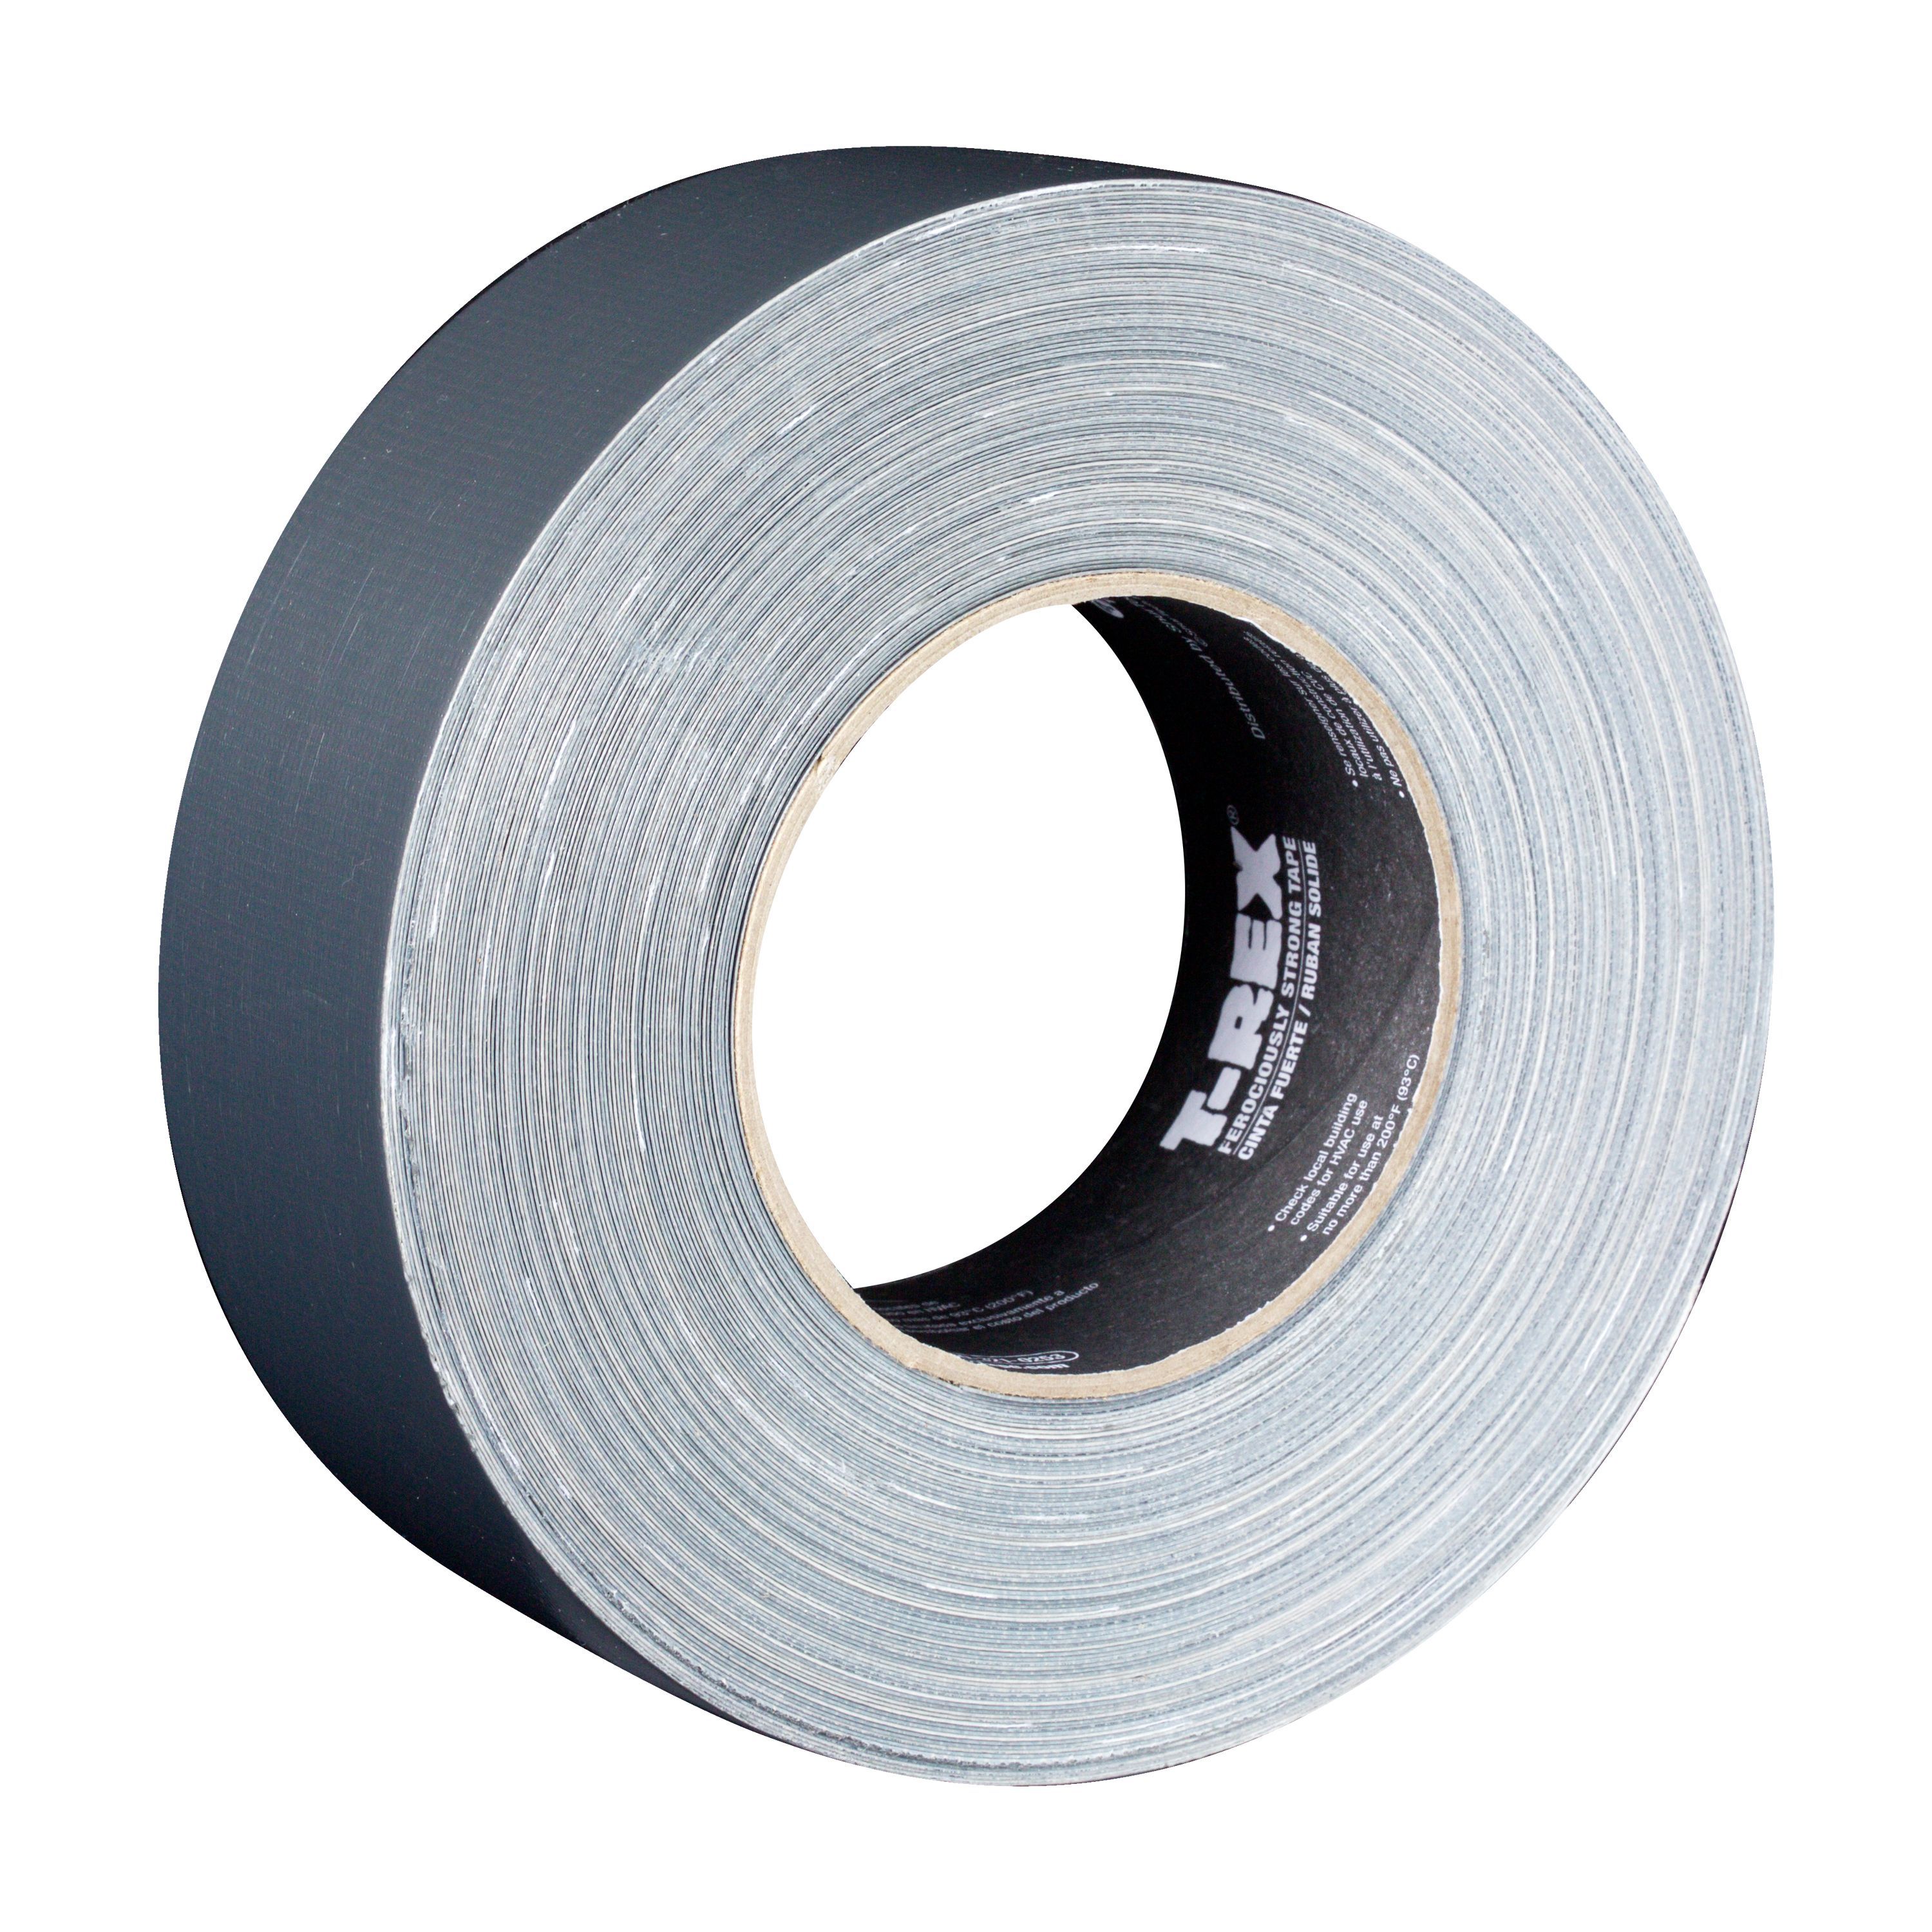 Diall Flat White Double-sided Tape (L)25m (W)50mm